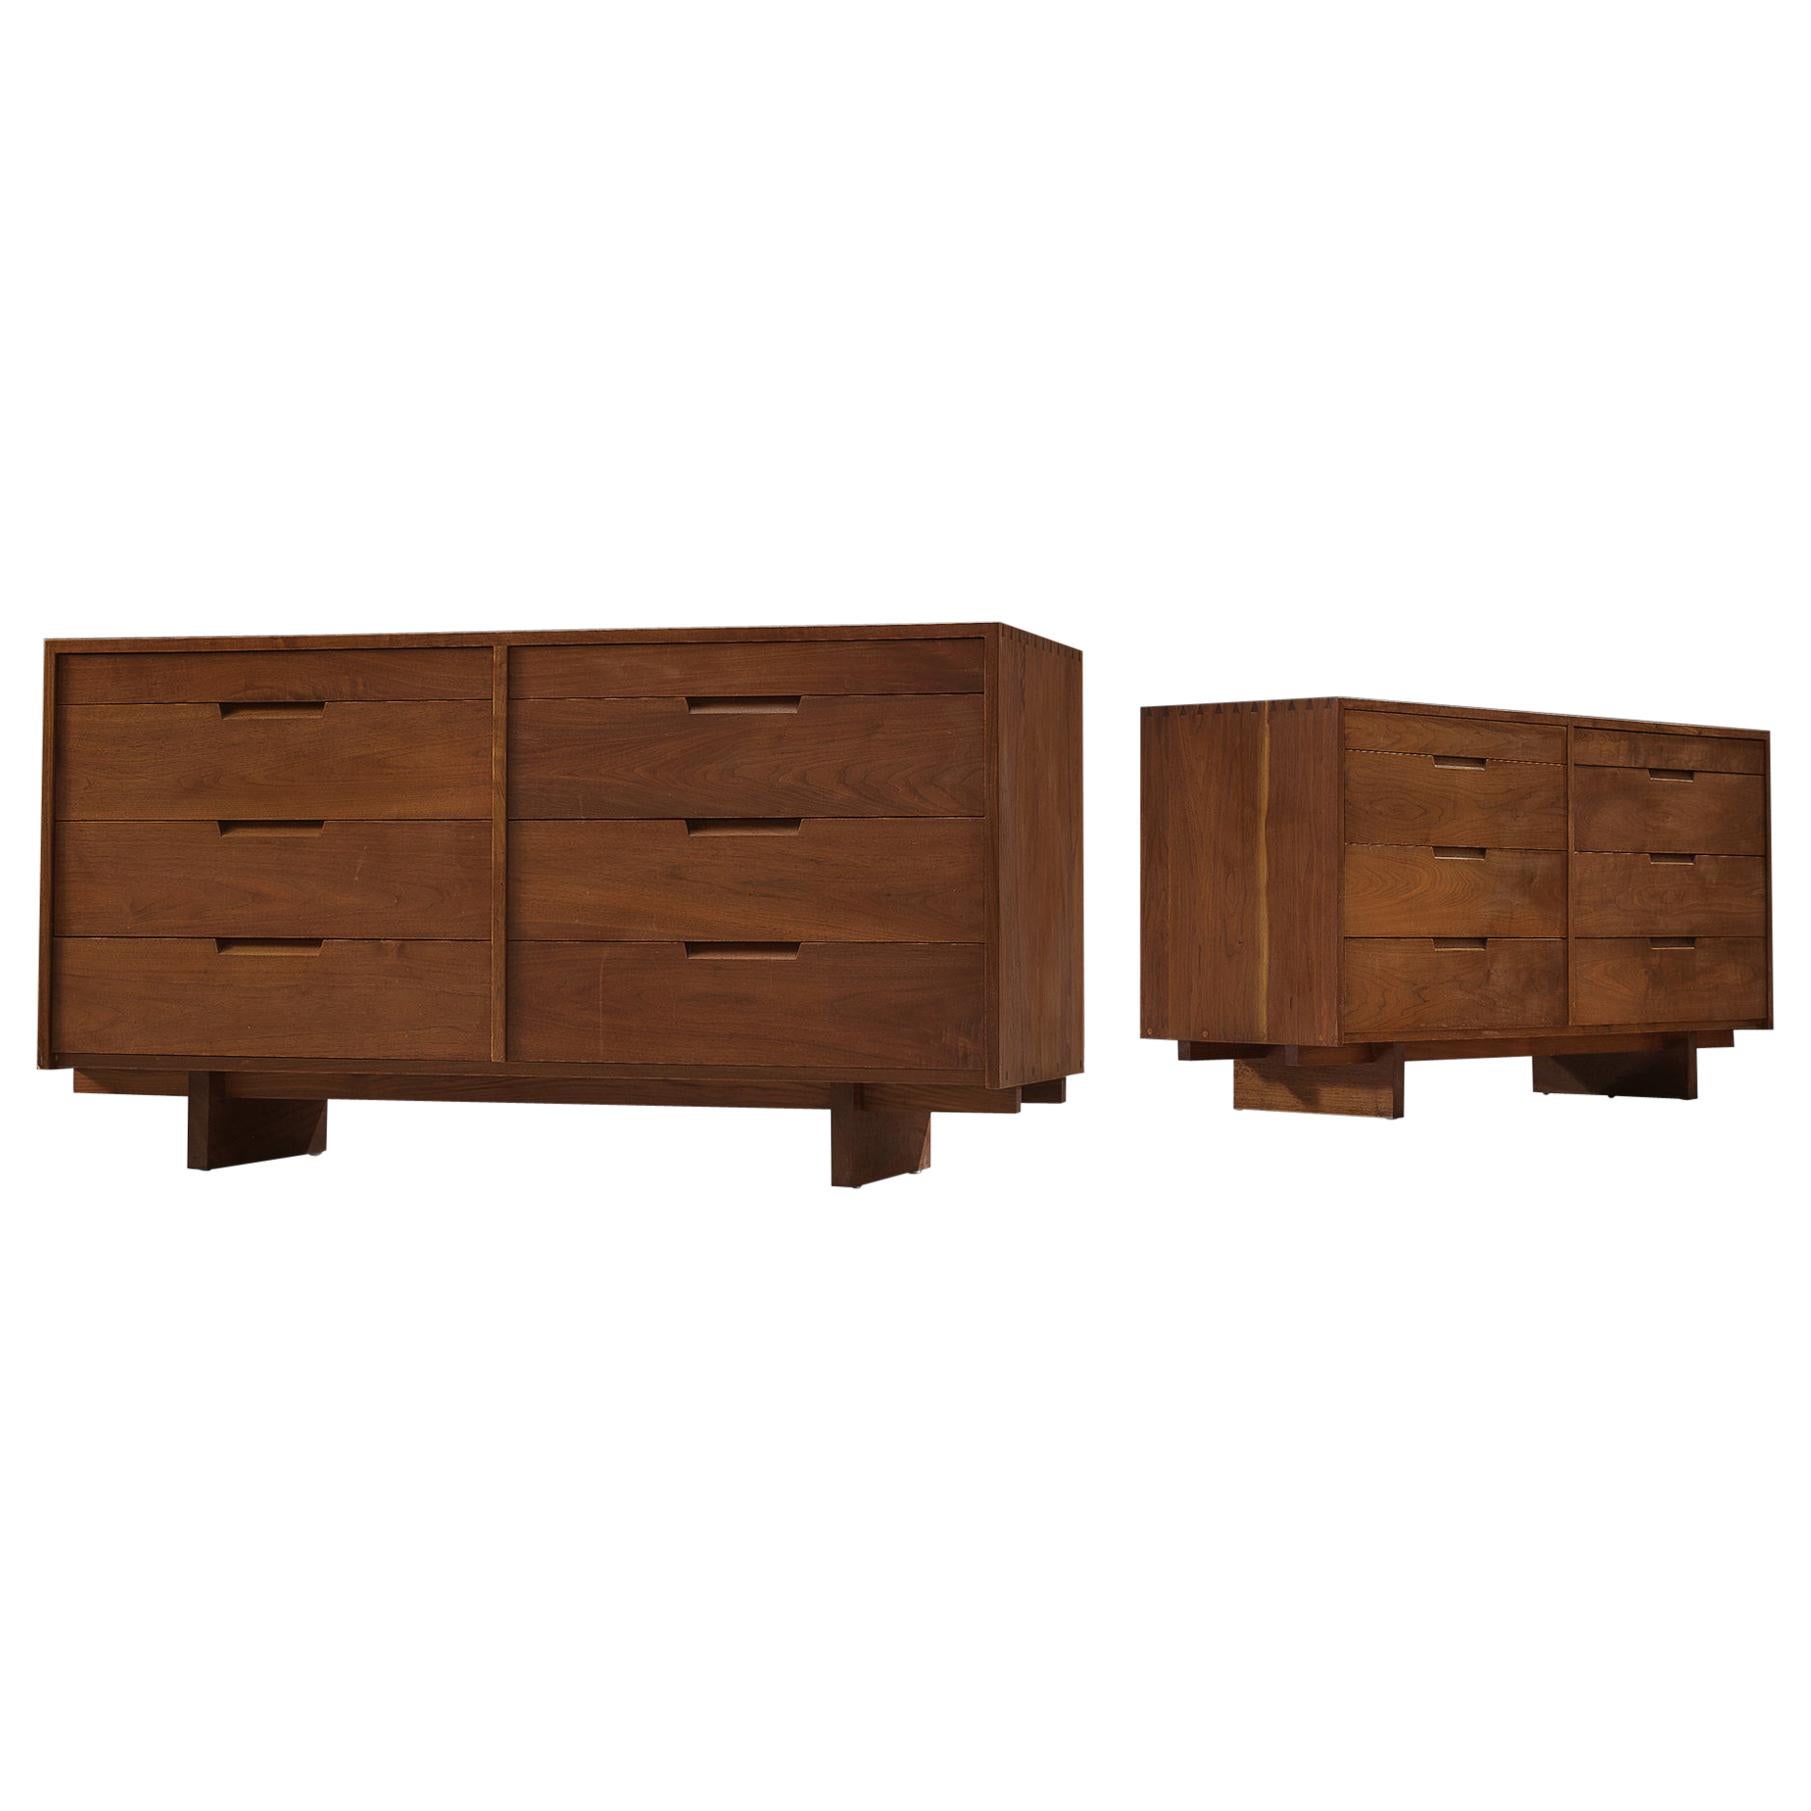 George Nakashima a 'Born Together' pair of Chests of Drawers in Walnut,  1955